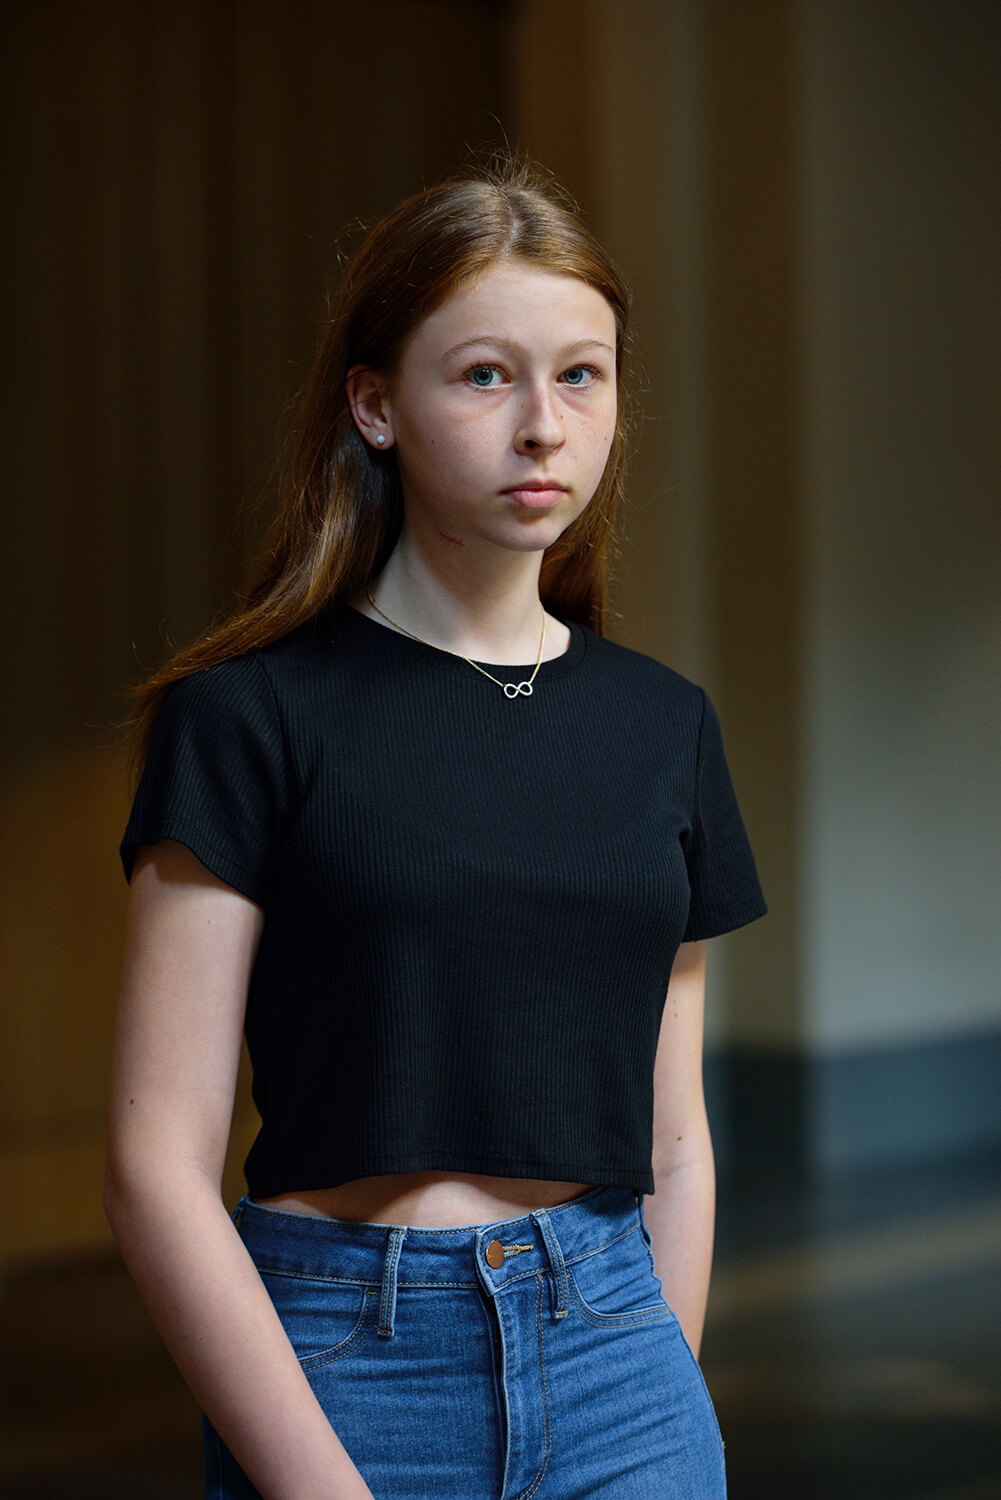 Göran Gnaudschun, Young woman with infinity necklace, 2015, from: Mittelland, pigment print, 46.8 x 31.2 cm